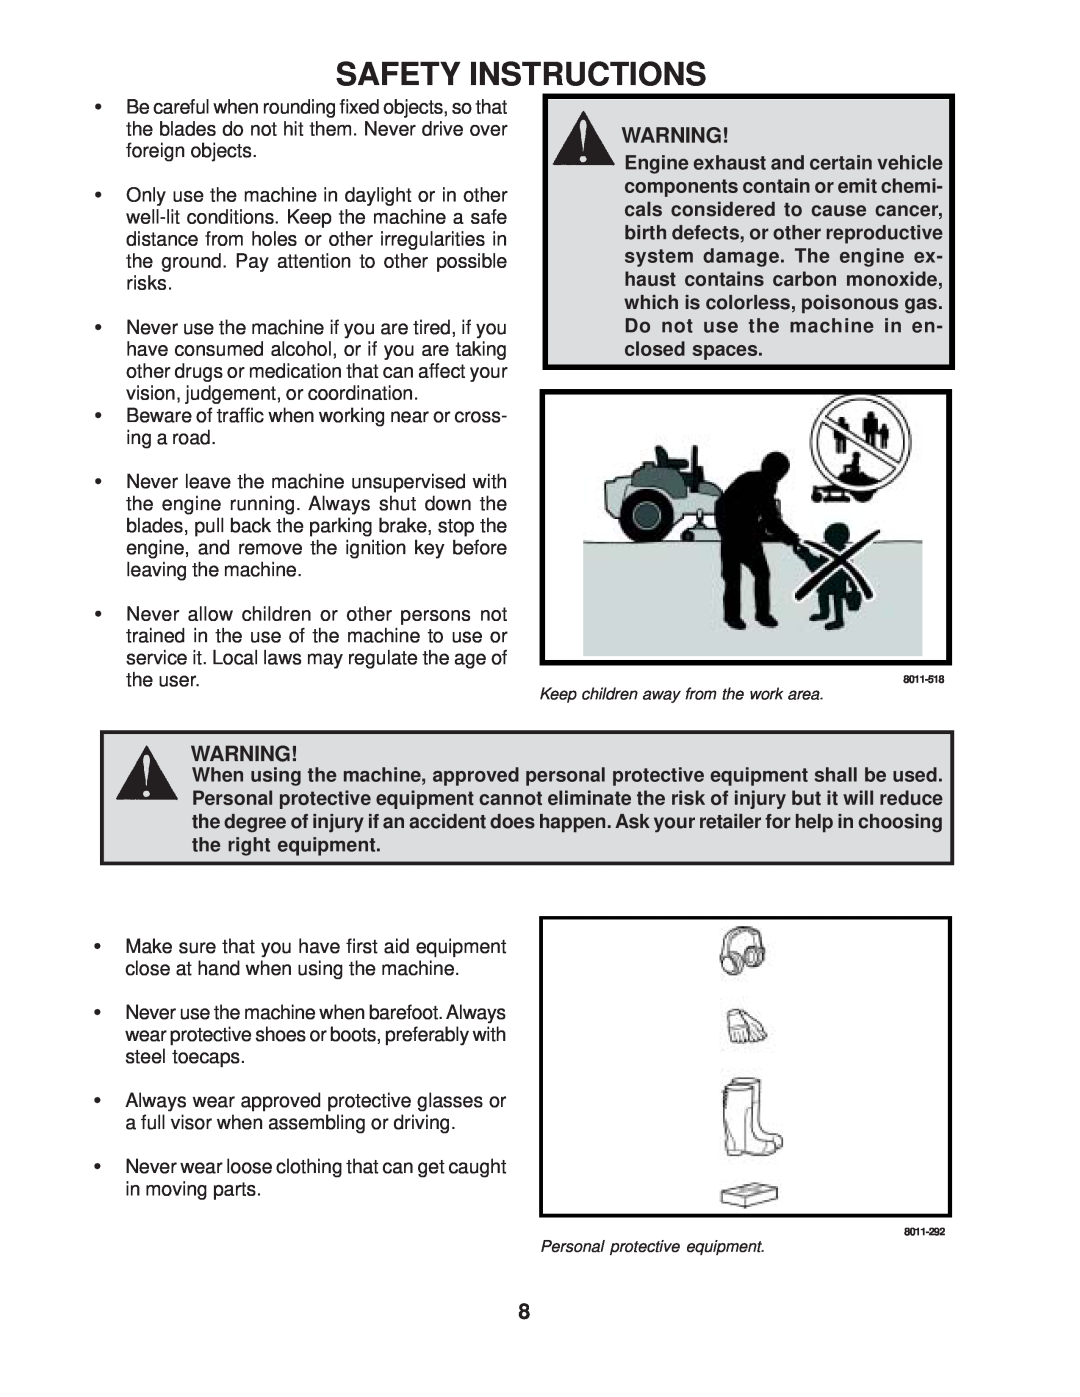 Yazoo/Kees ZVKH61303 manual Safety Instructions, Keep children away from the work area, Personal protective equipment 